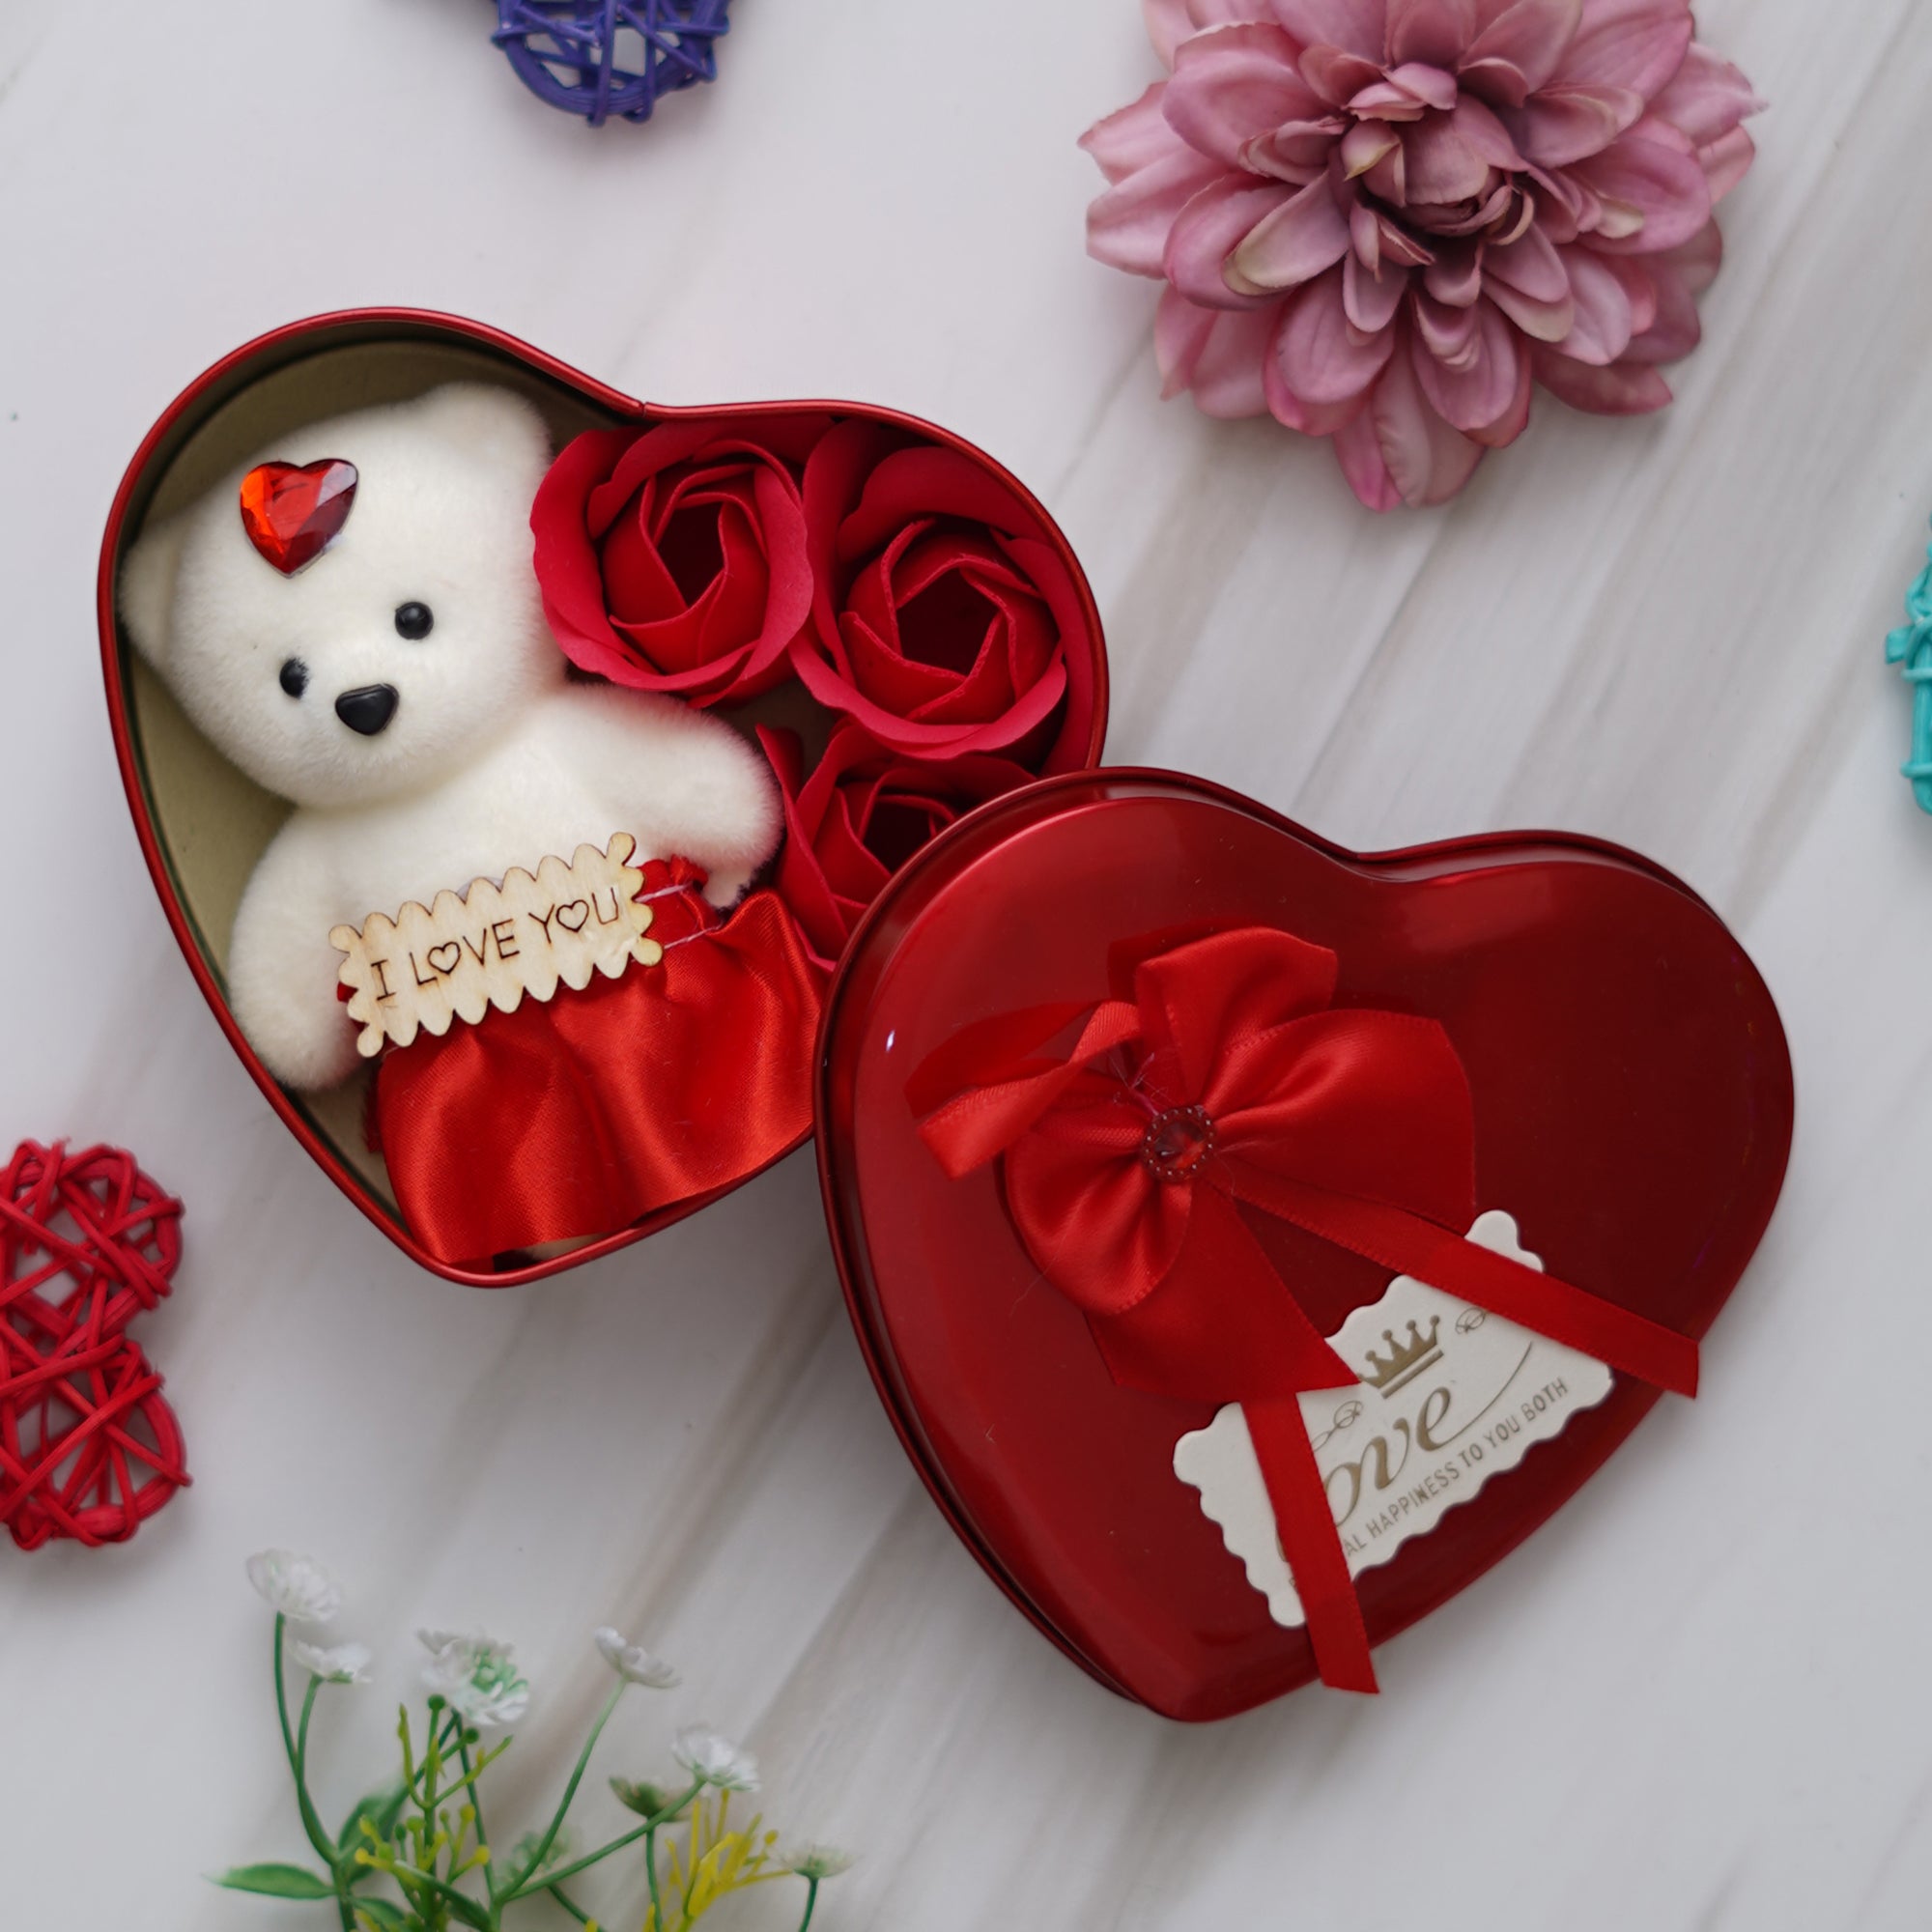 Valentine Combo of Pack of 8 Love Gift Cards, "Love" Wooden Photo Frame With Red Stand, Heart Shaped Gift Box Set with White Teddy and Red Roses 5